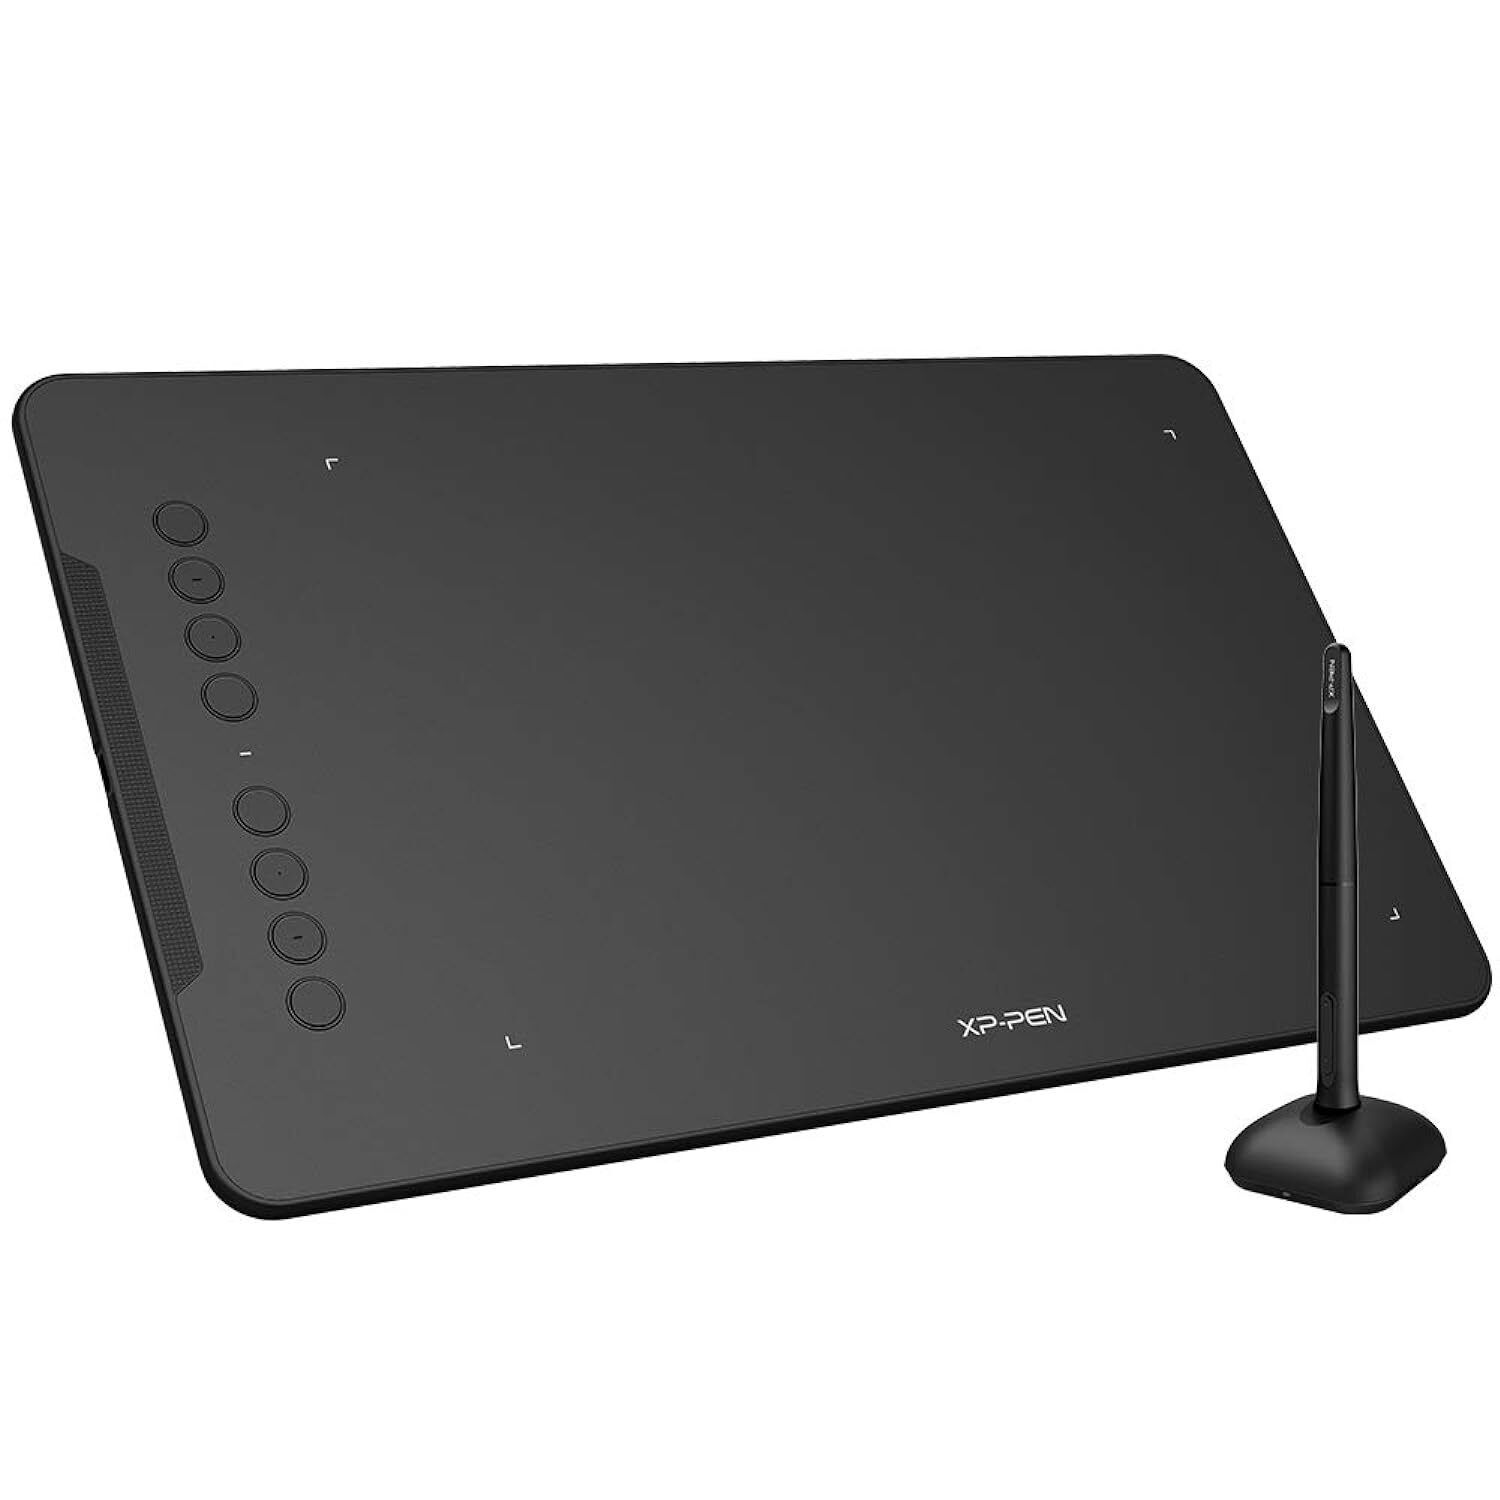 Xppen Deco 01 V2 Graphics Tablet 10X6.25 Inch Drawing Tablet 8192 Levels Press